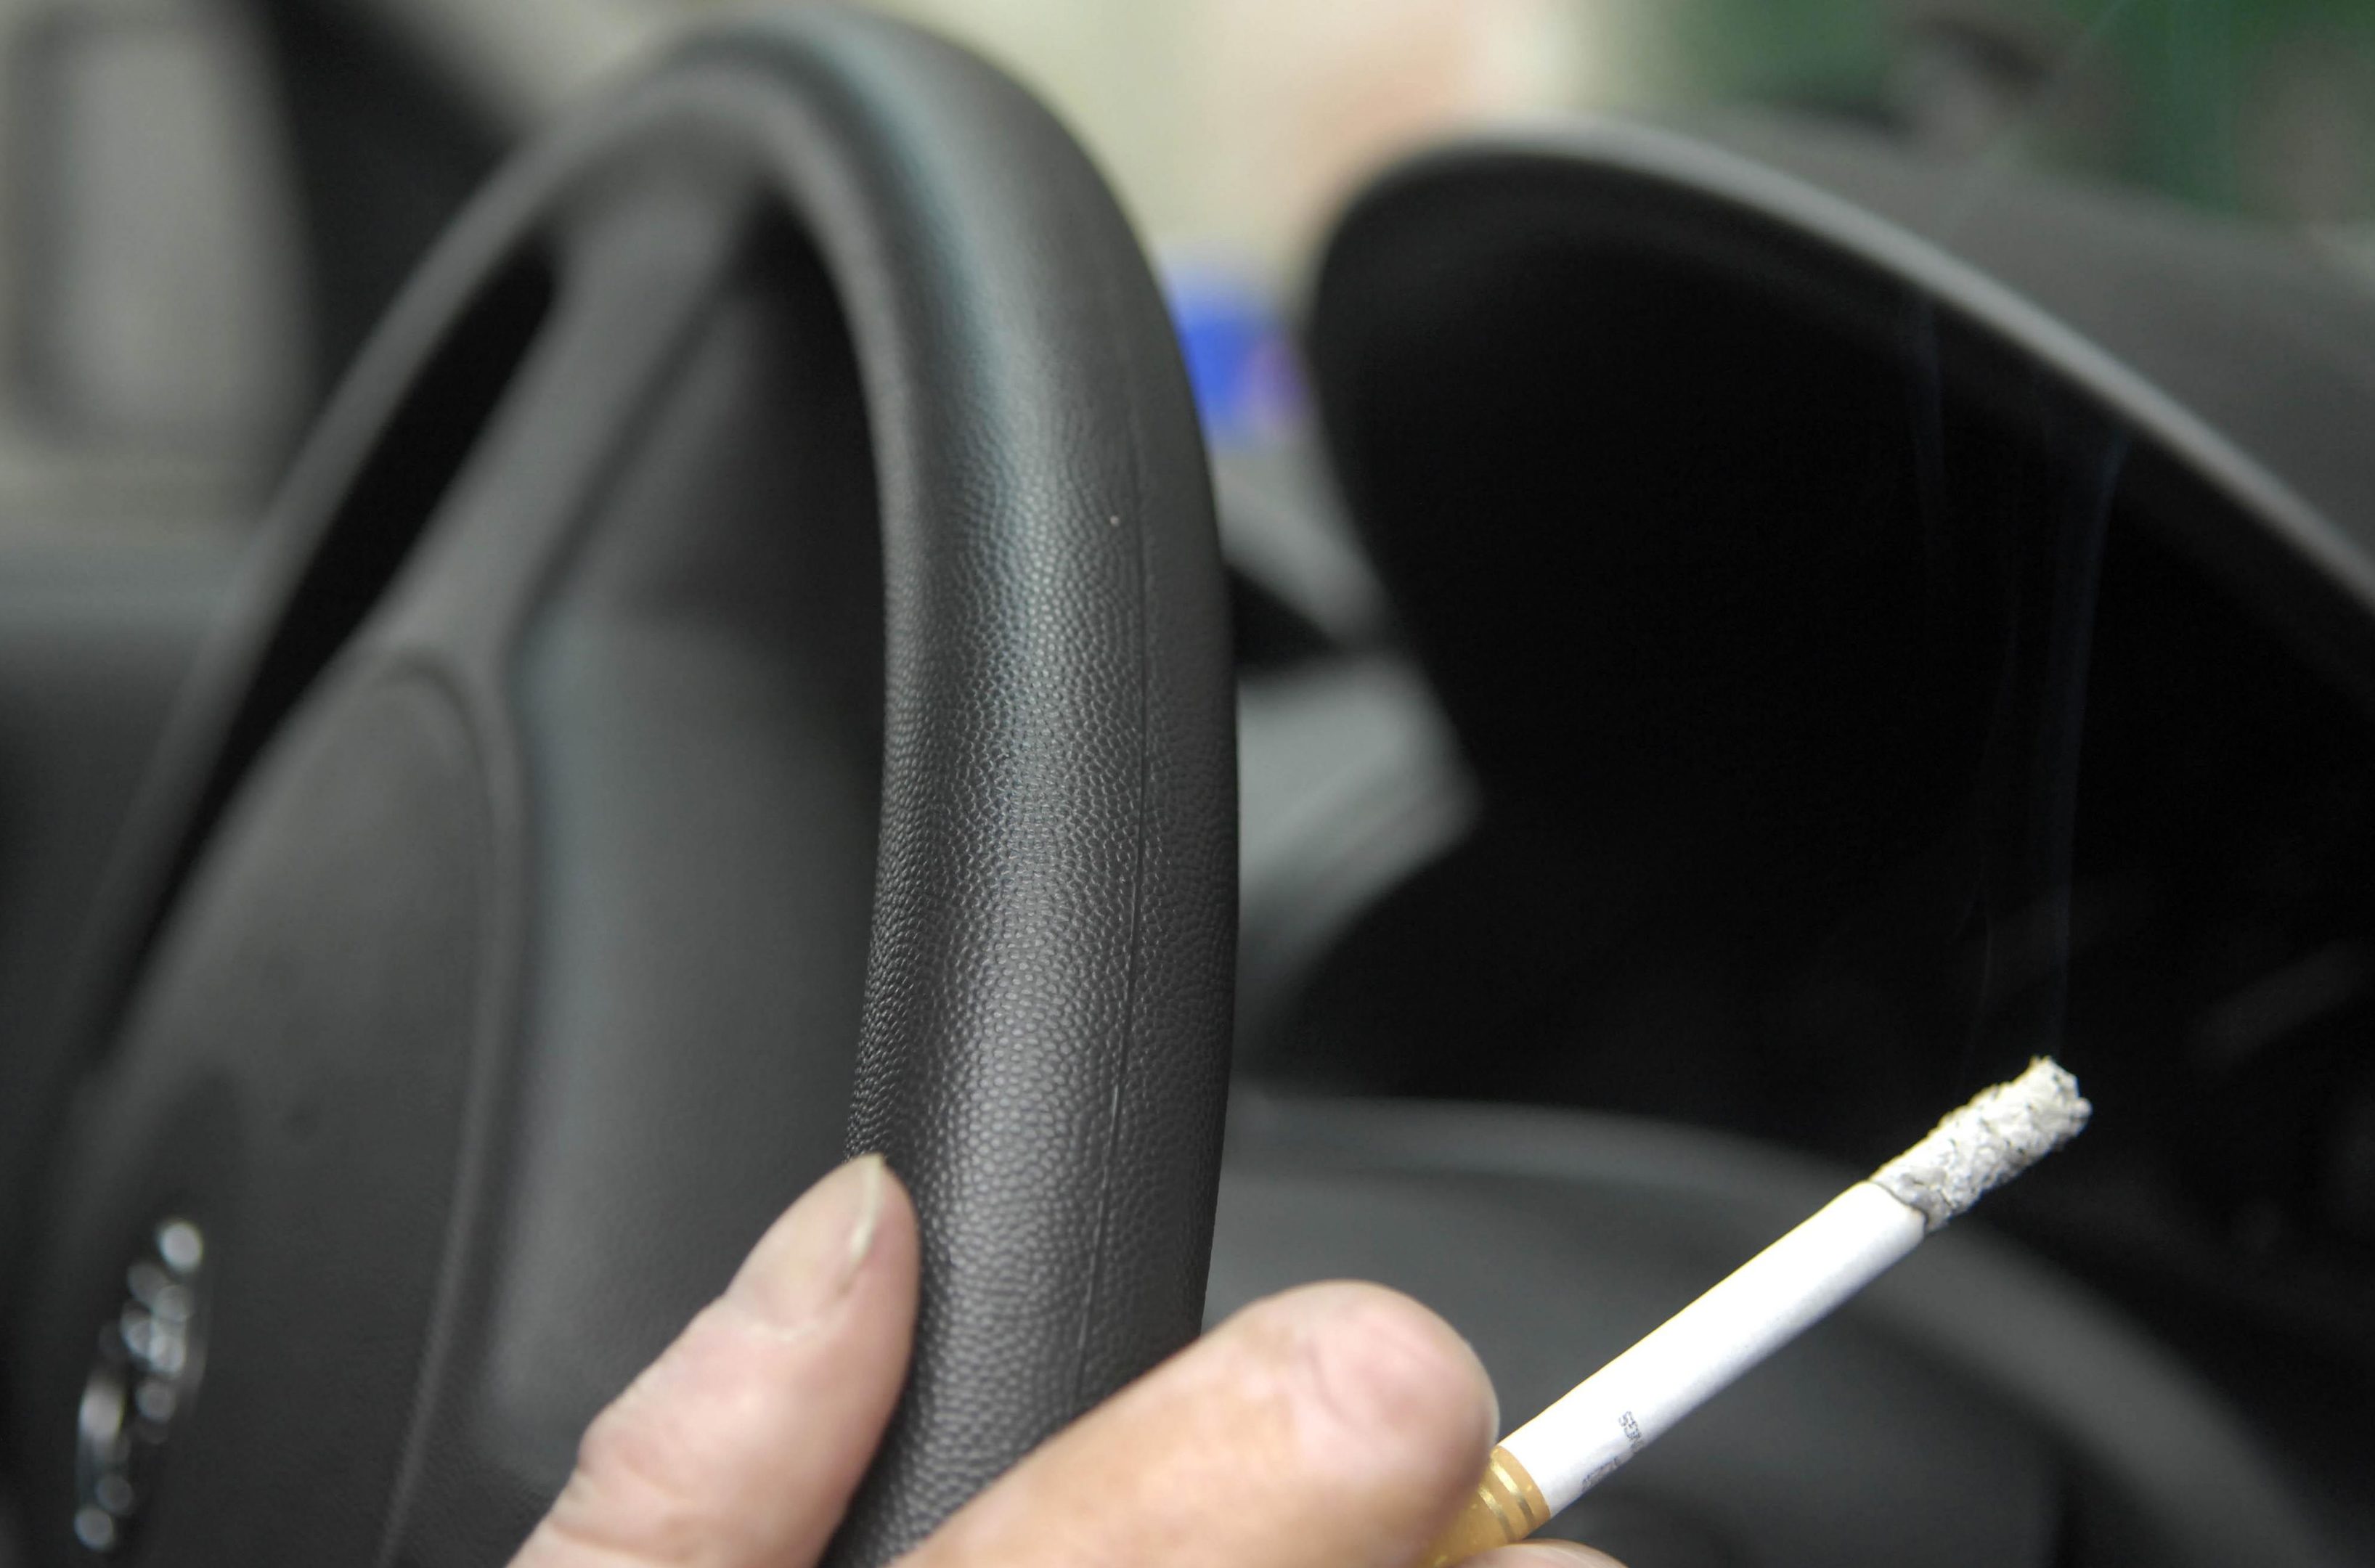 A new law bans smoking in cars when children are present.